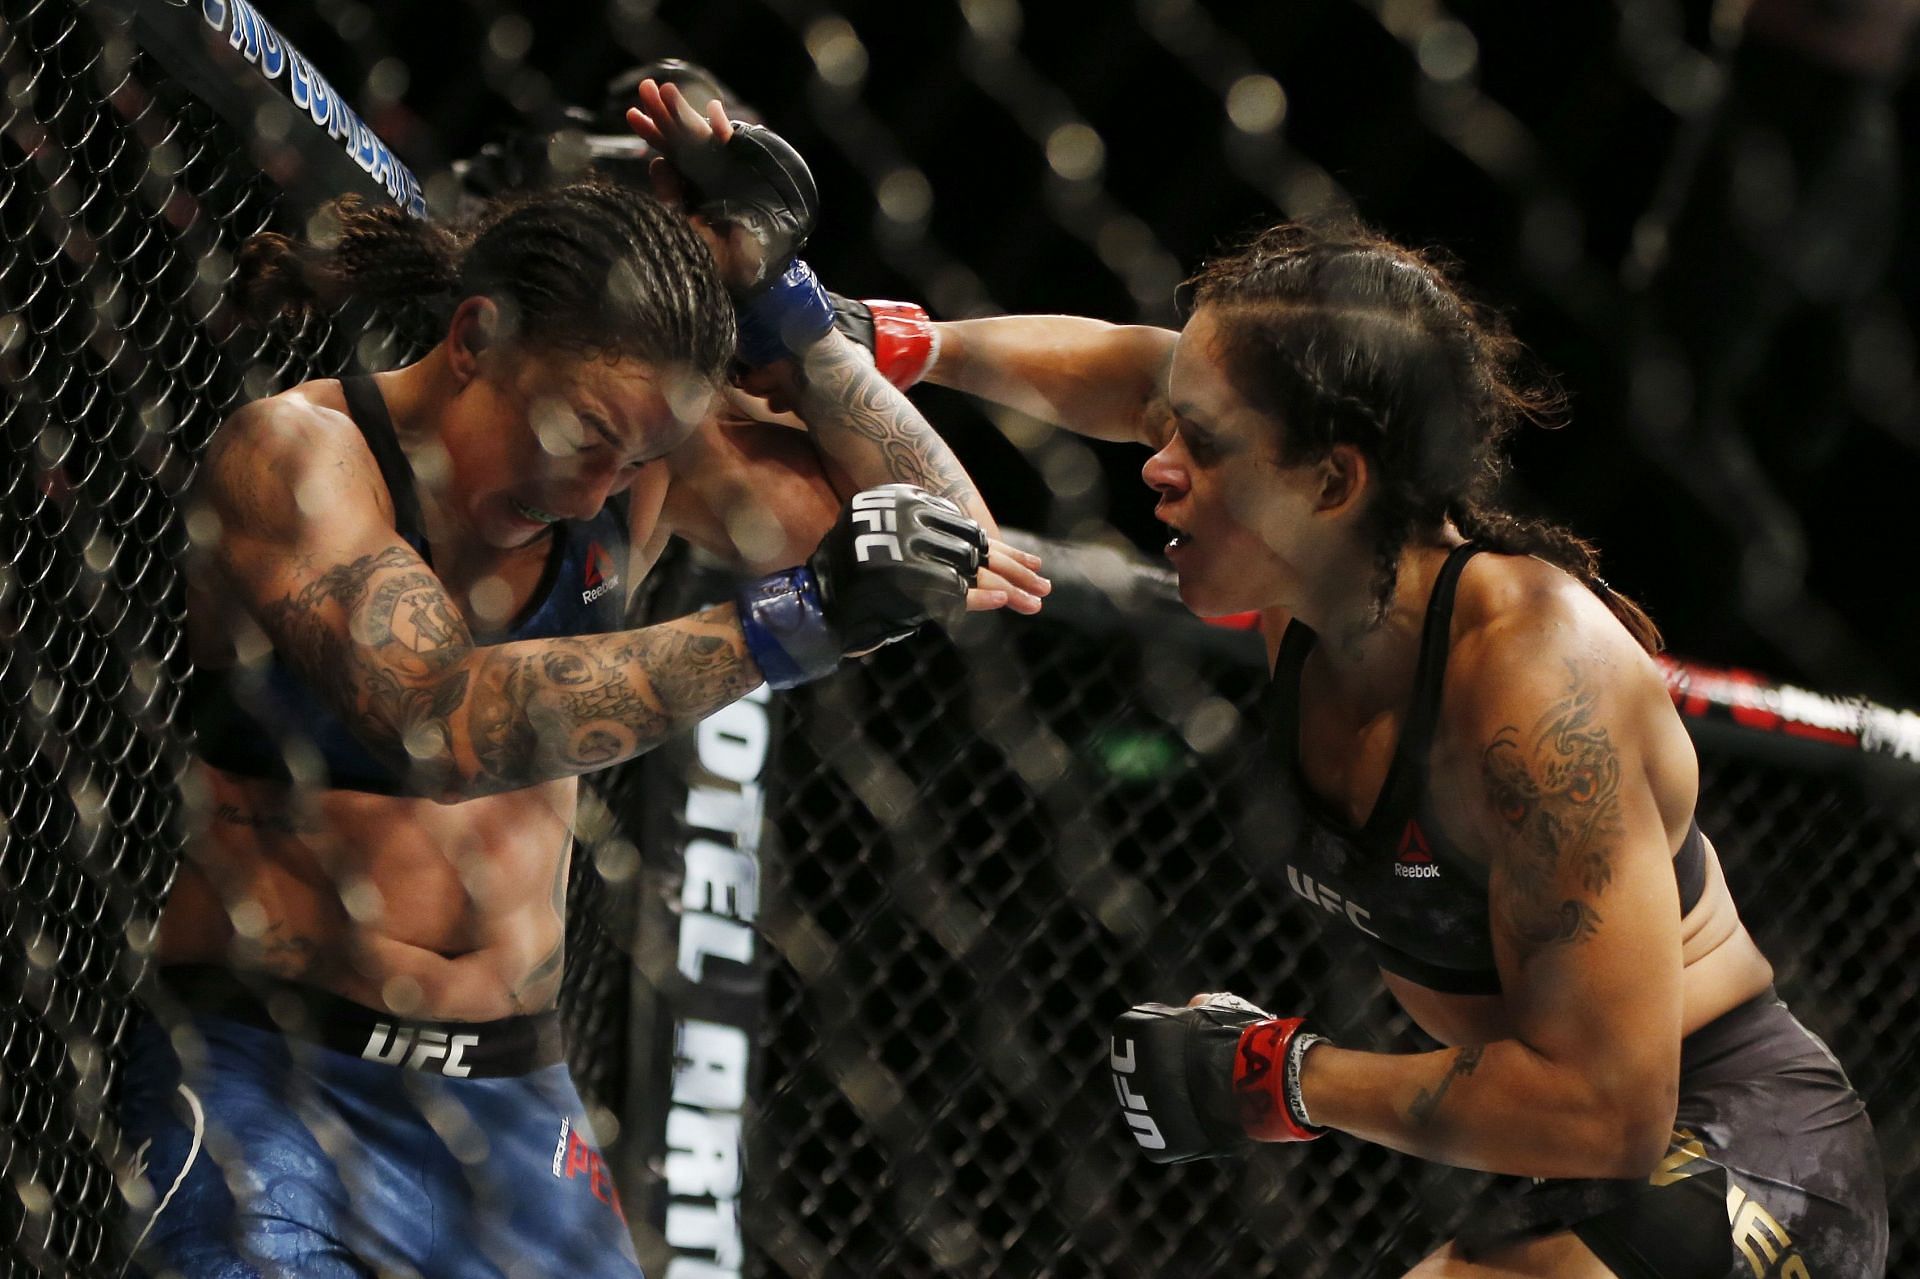 Raquel Pennington&#039;s corner should&#039;ve recognized that their fighter was outclassed by Amanda Nunes at UFC 224.